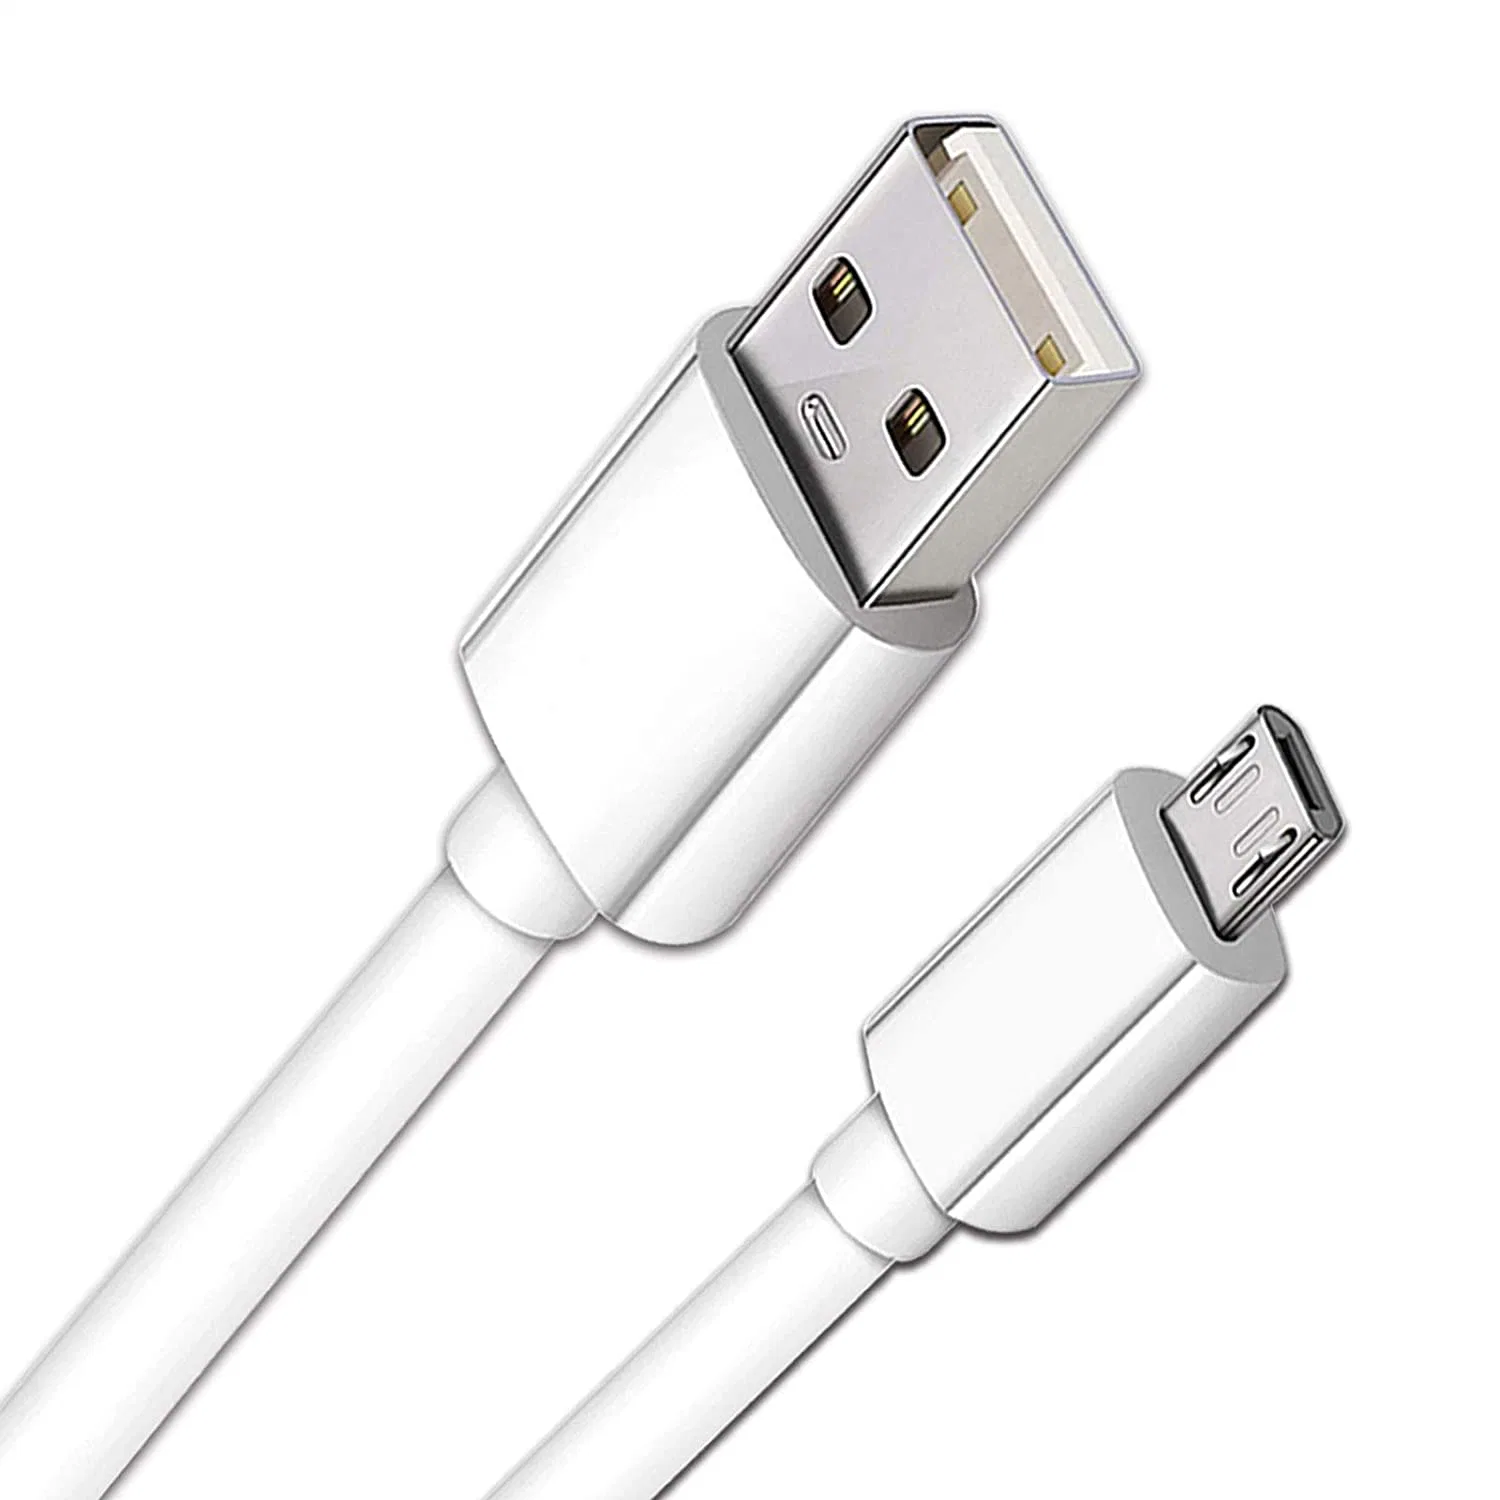 10FT Long Android Charger Cable Fast Charge, USB to Micro USB Cable White, Micro USB 2.0 Cable USB Micro Cable for Samsung Charger Cable